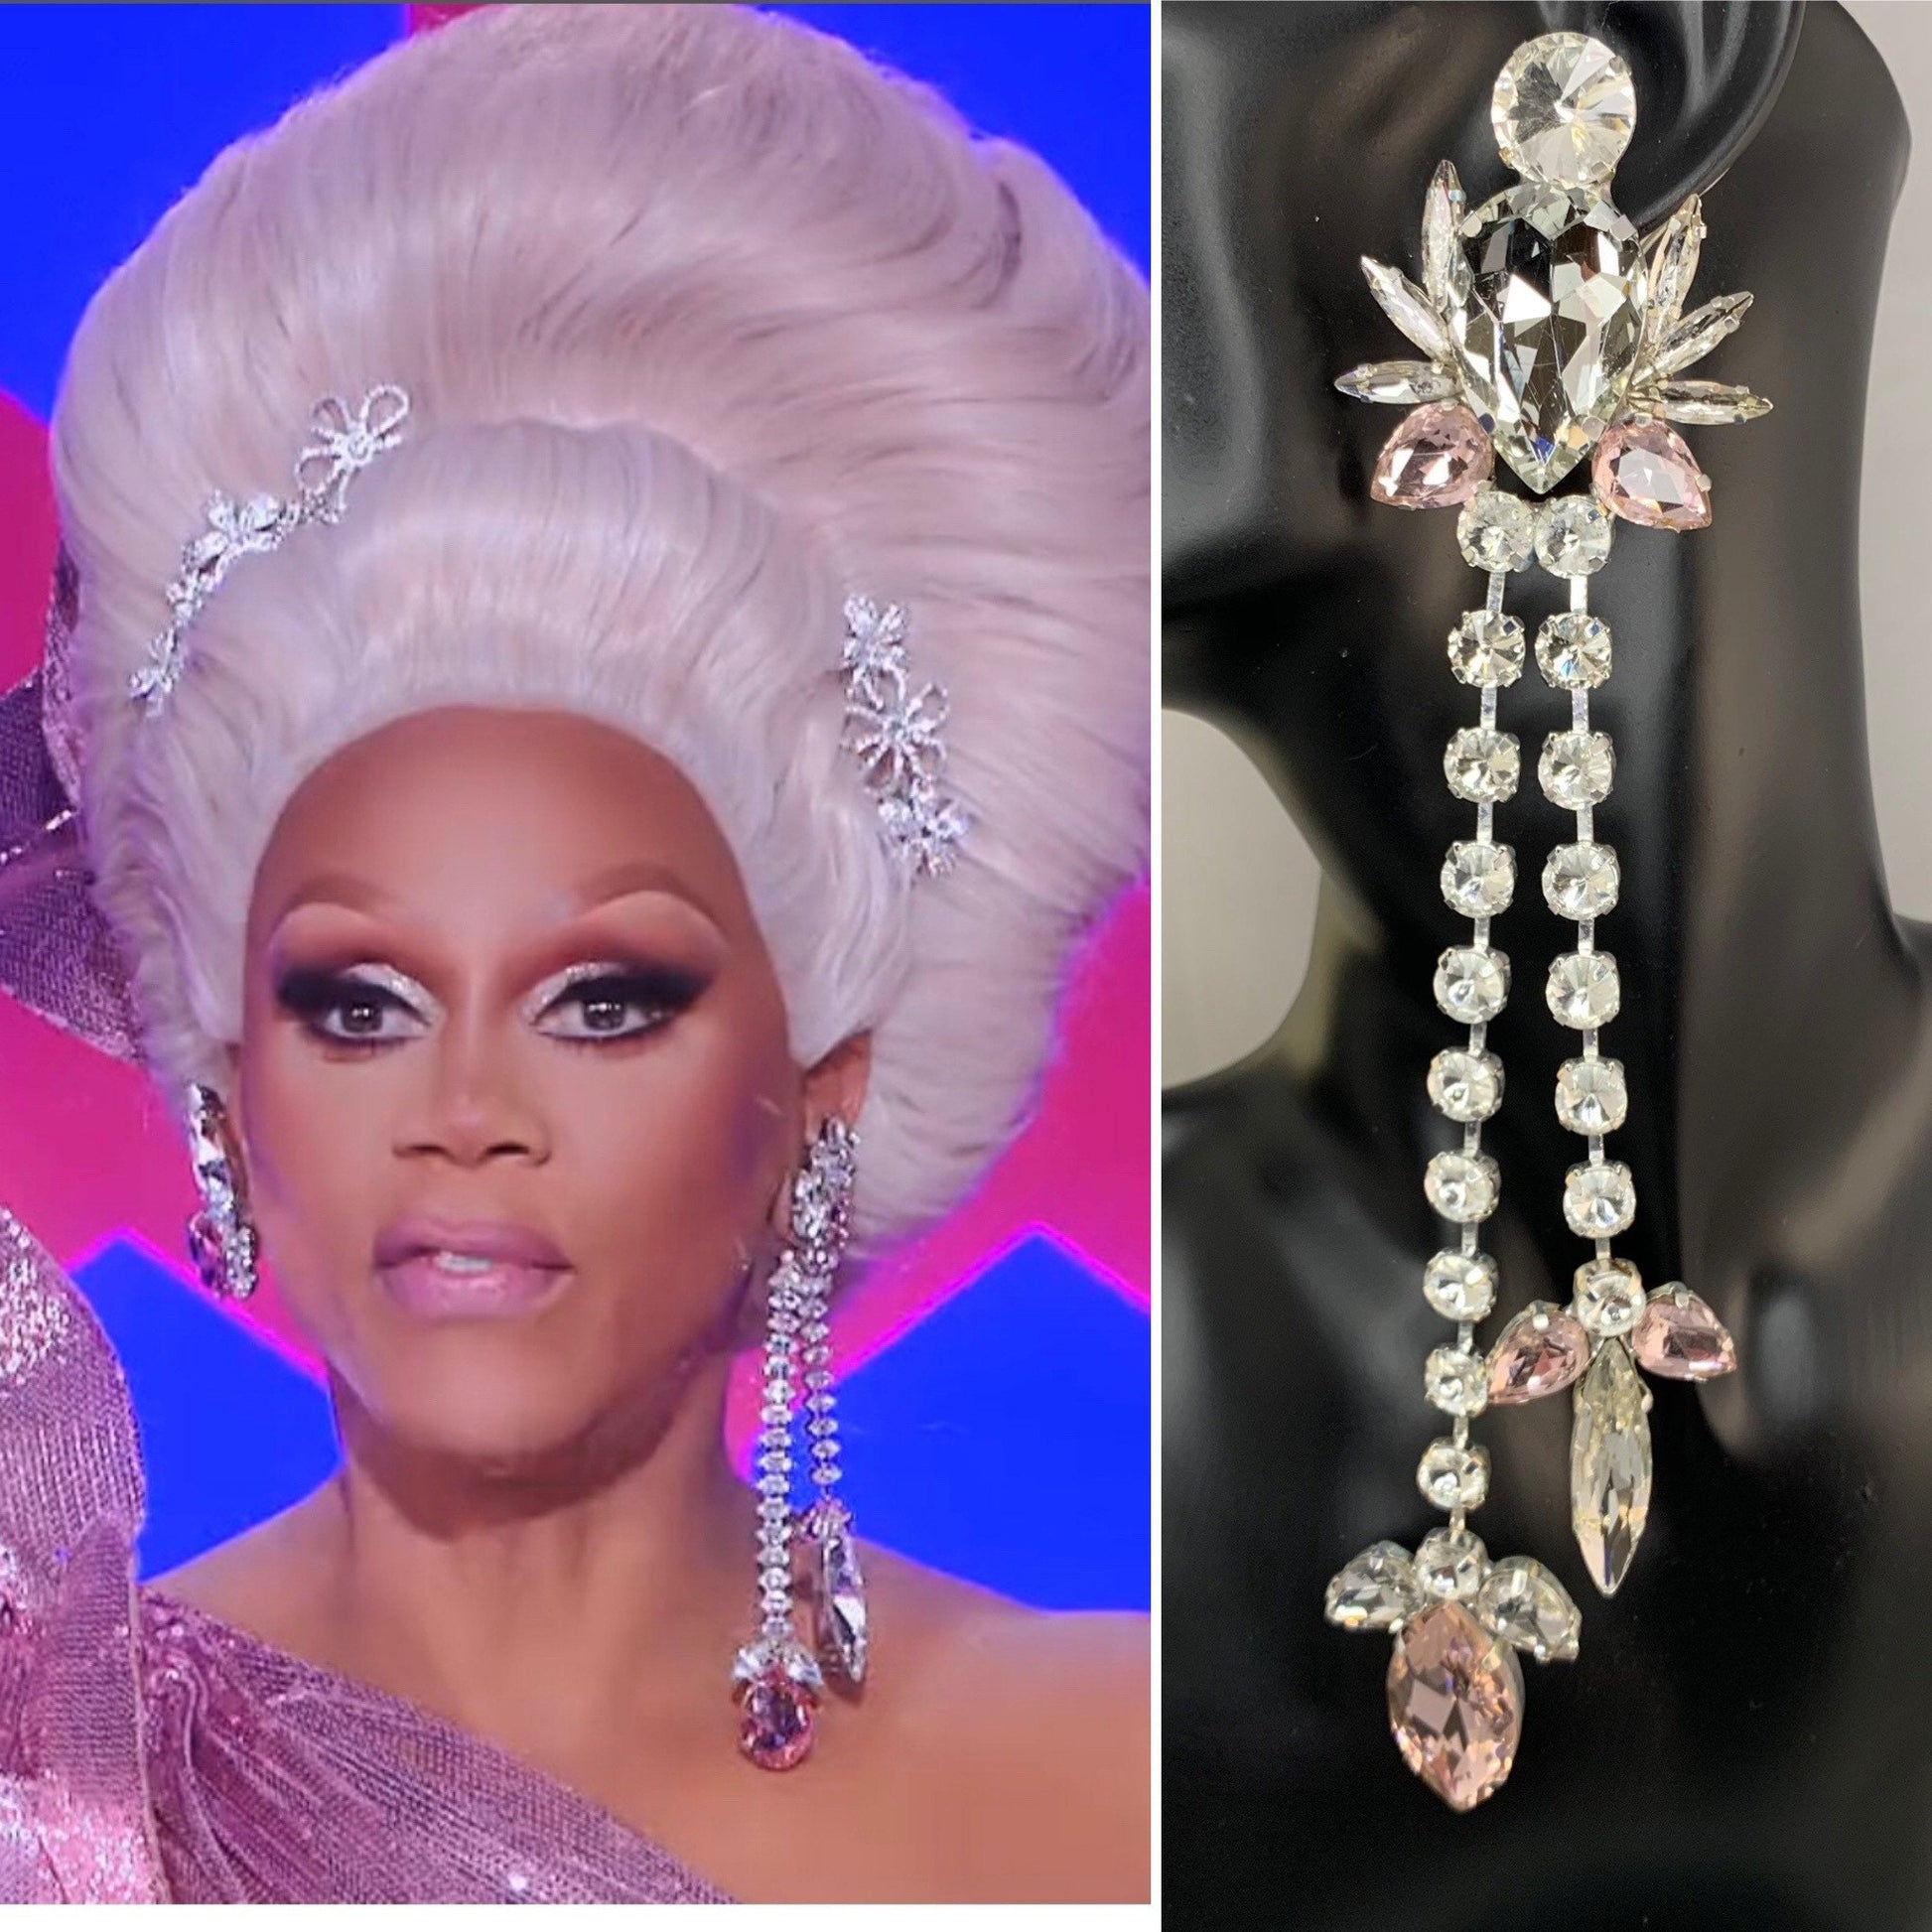 Rupaul style Crystal Earrings / Long Sparkling Clip on or Pierced / Gift / Drag Queen Jewelry / Costume Jewellery